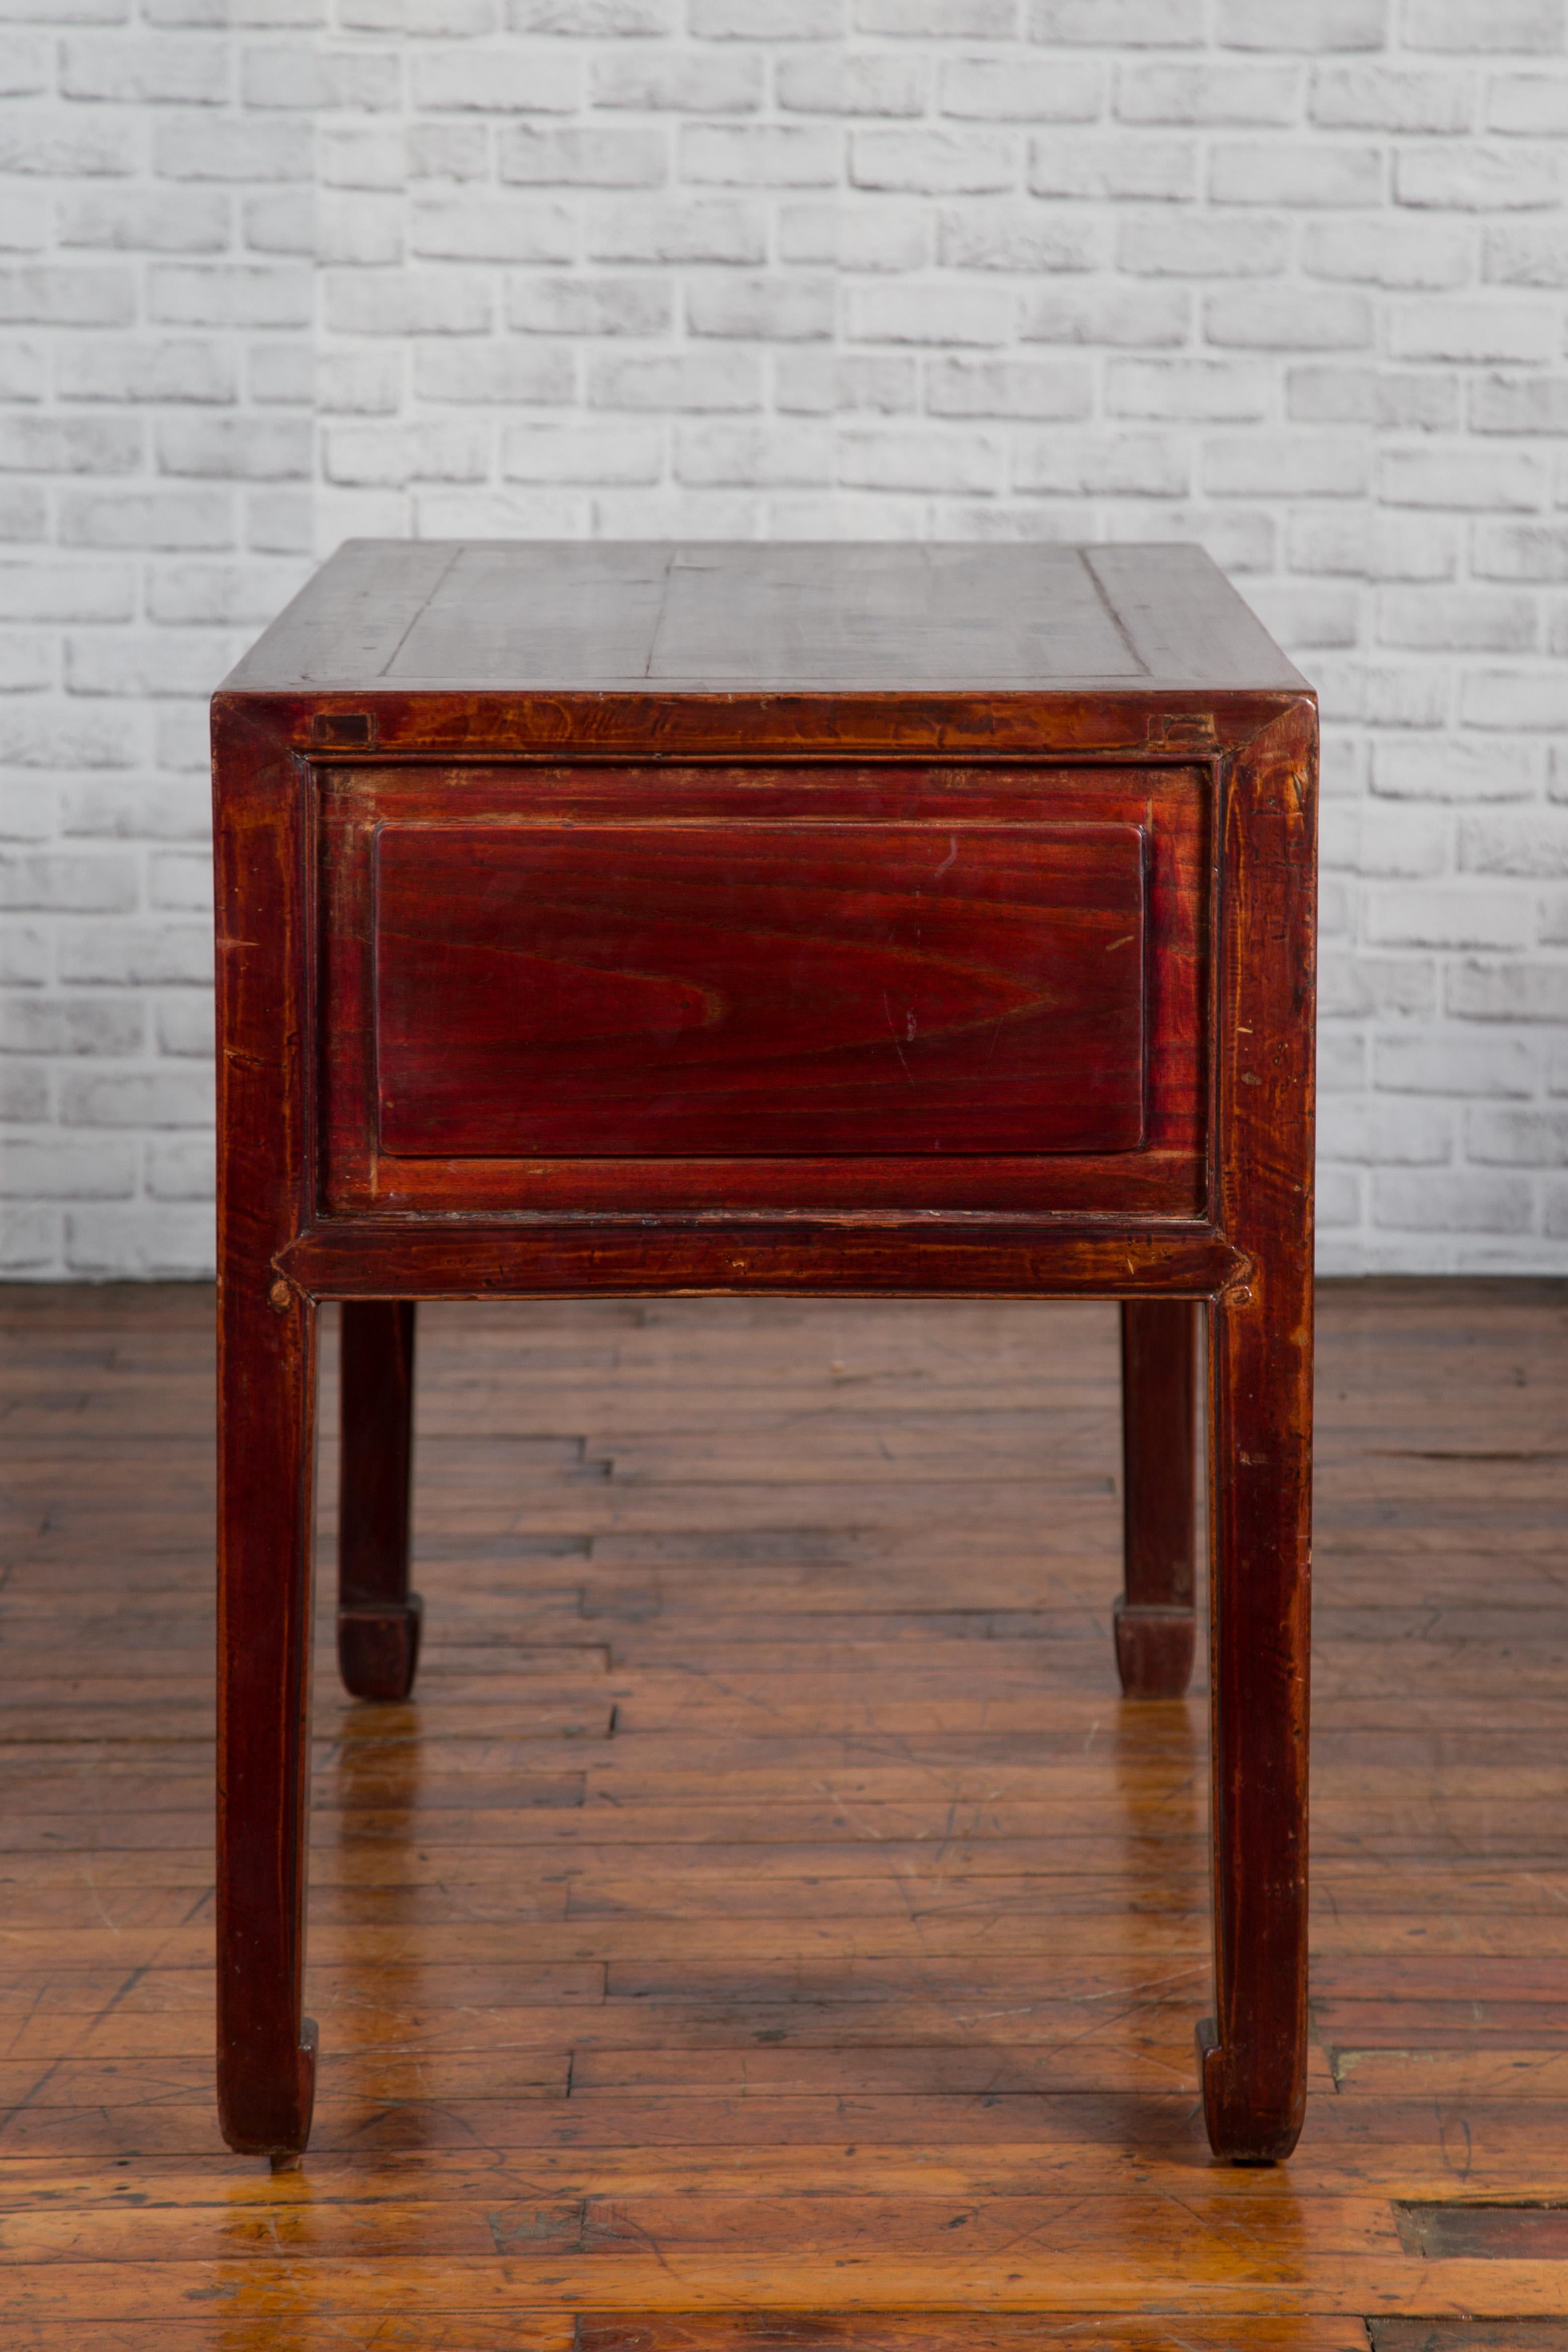 Chinese Antique Console Table with Drawers, Horse Hoof Legs and Dark Red Patina For Sale 6